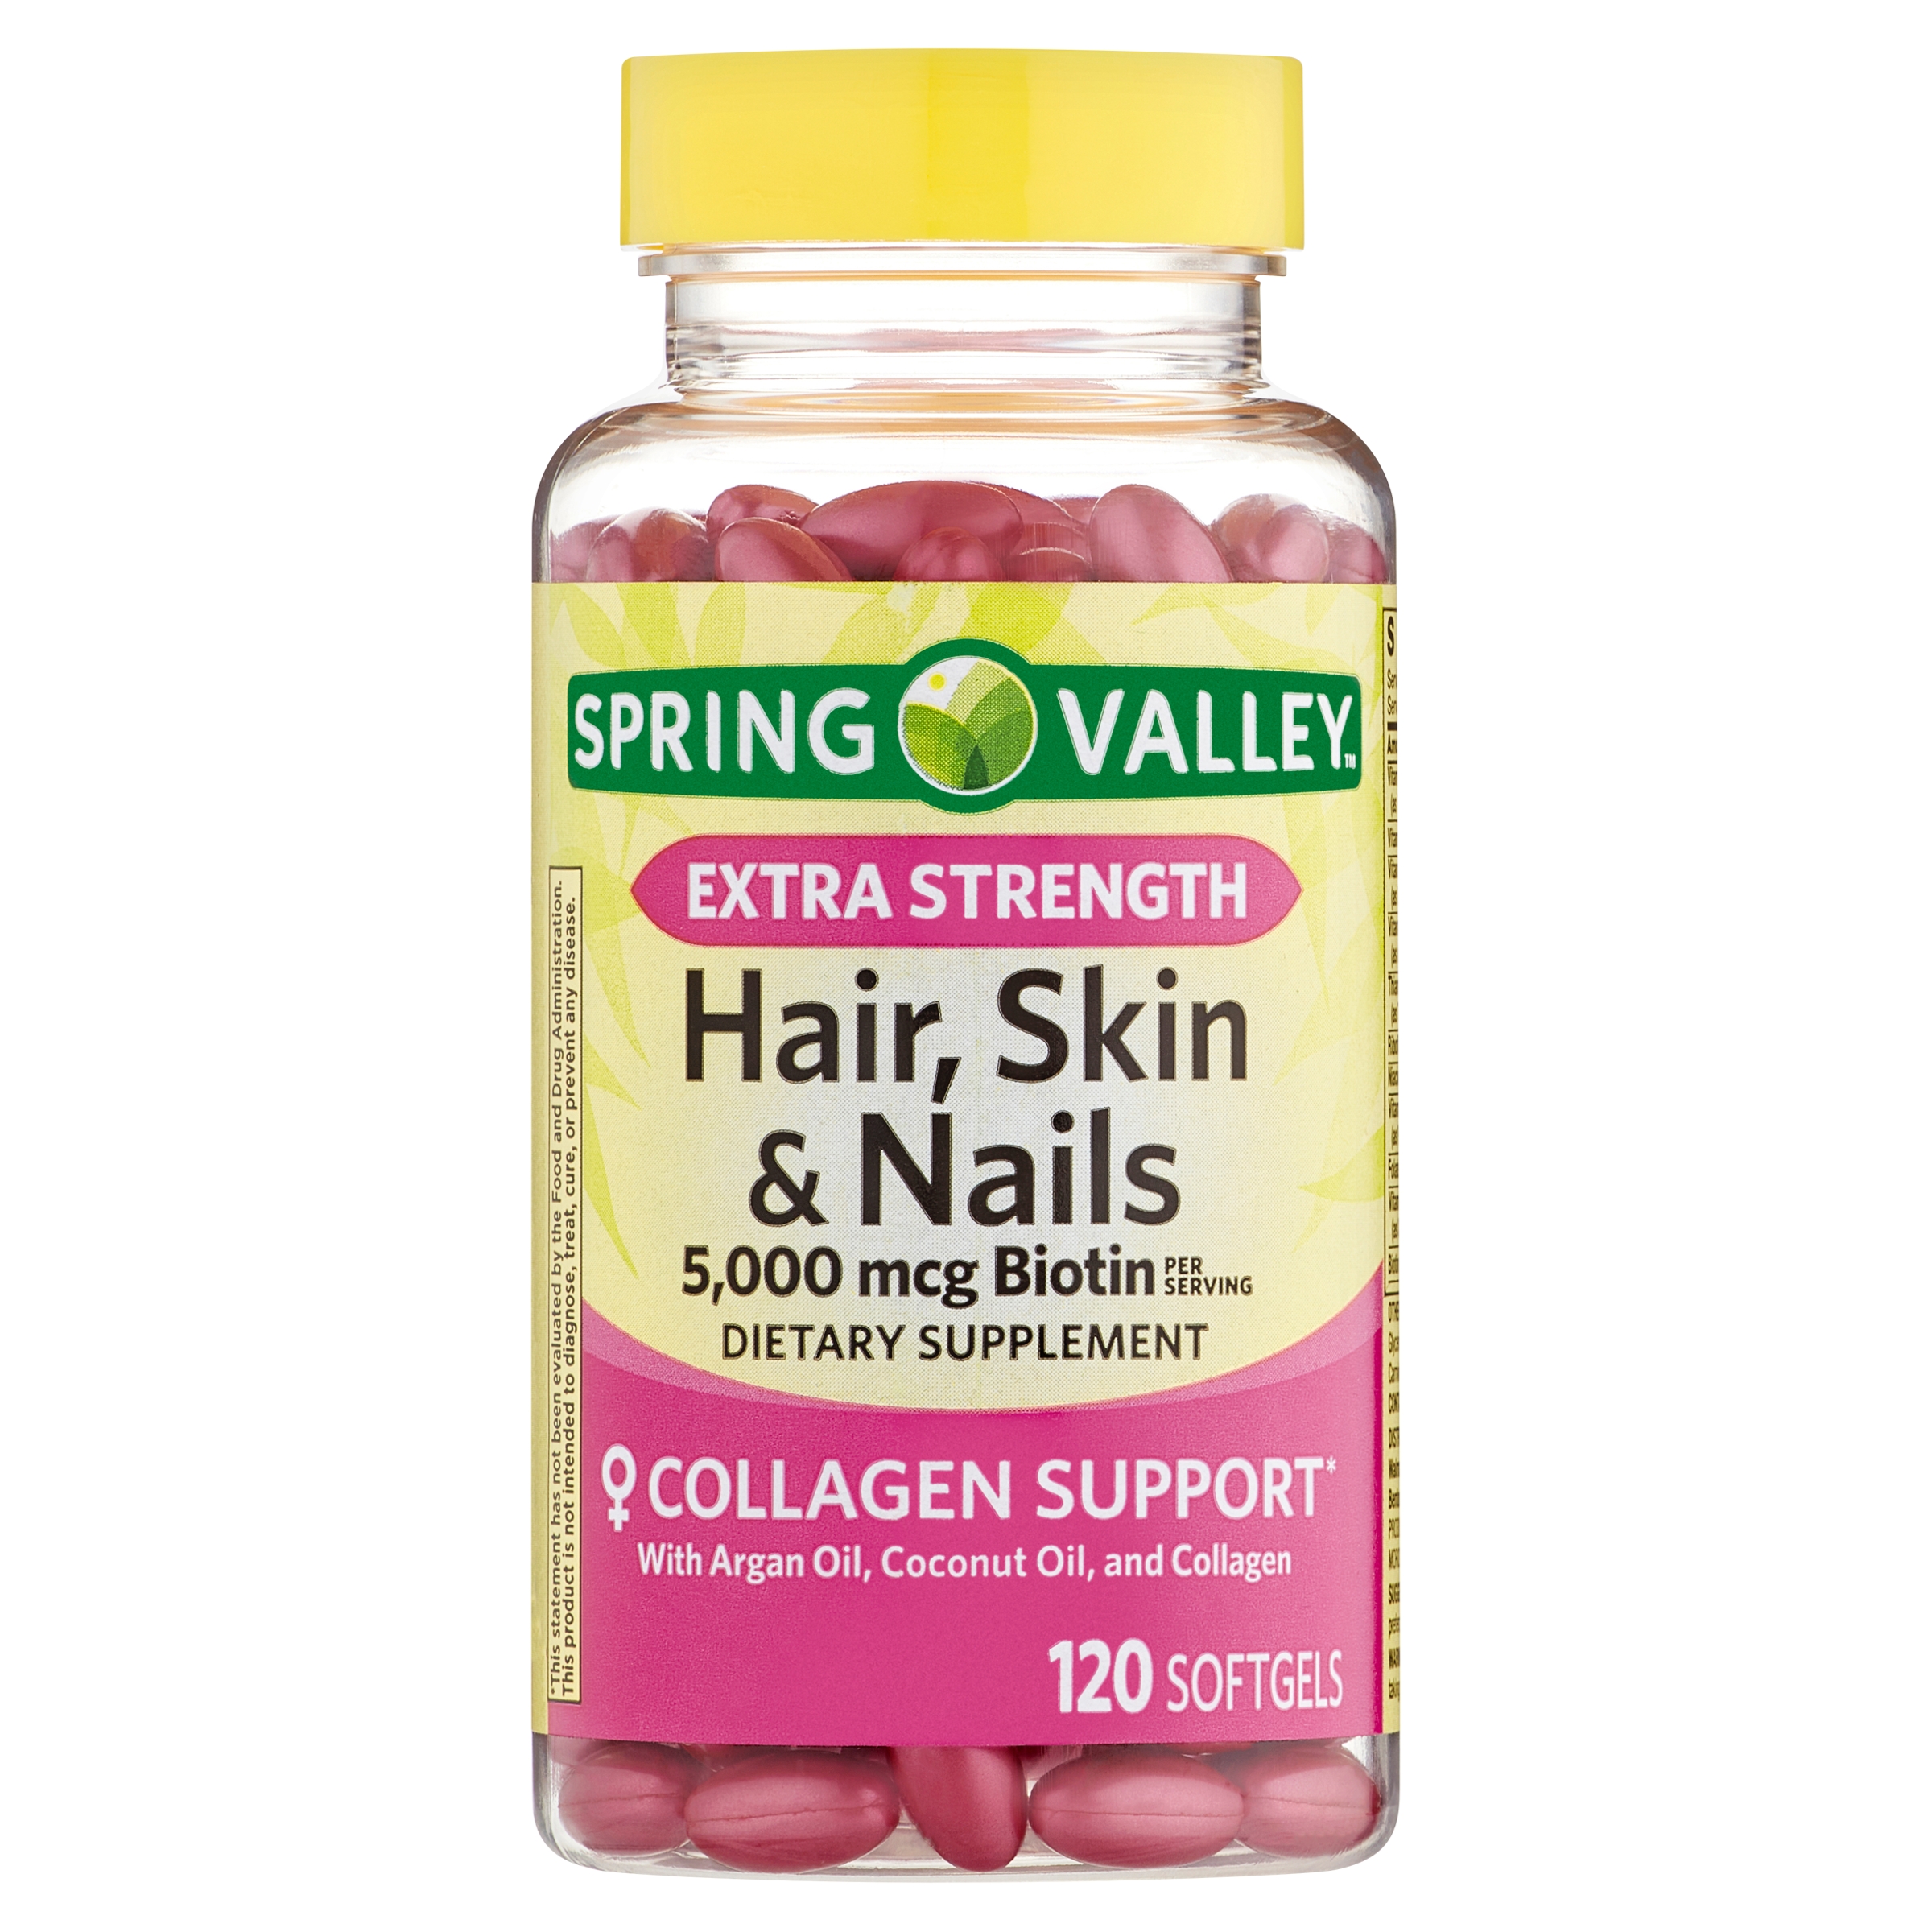 Spring Valley Hair, Skin & Nails Dietary Supplement Softgels, 5,000 Mcg Biotin, 120 Ct - image 1 of 13